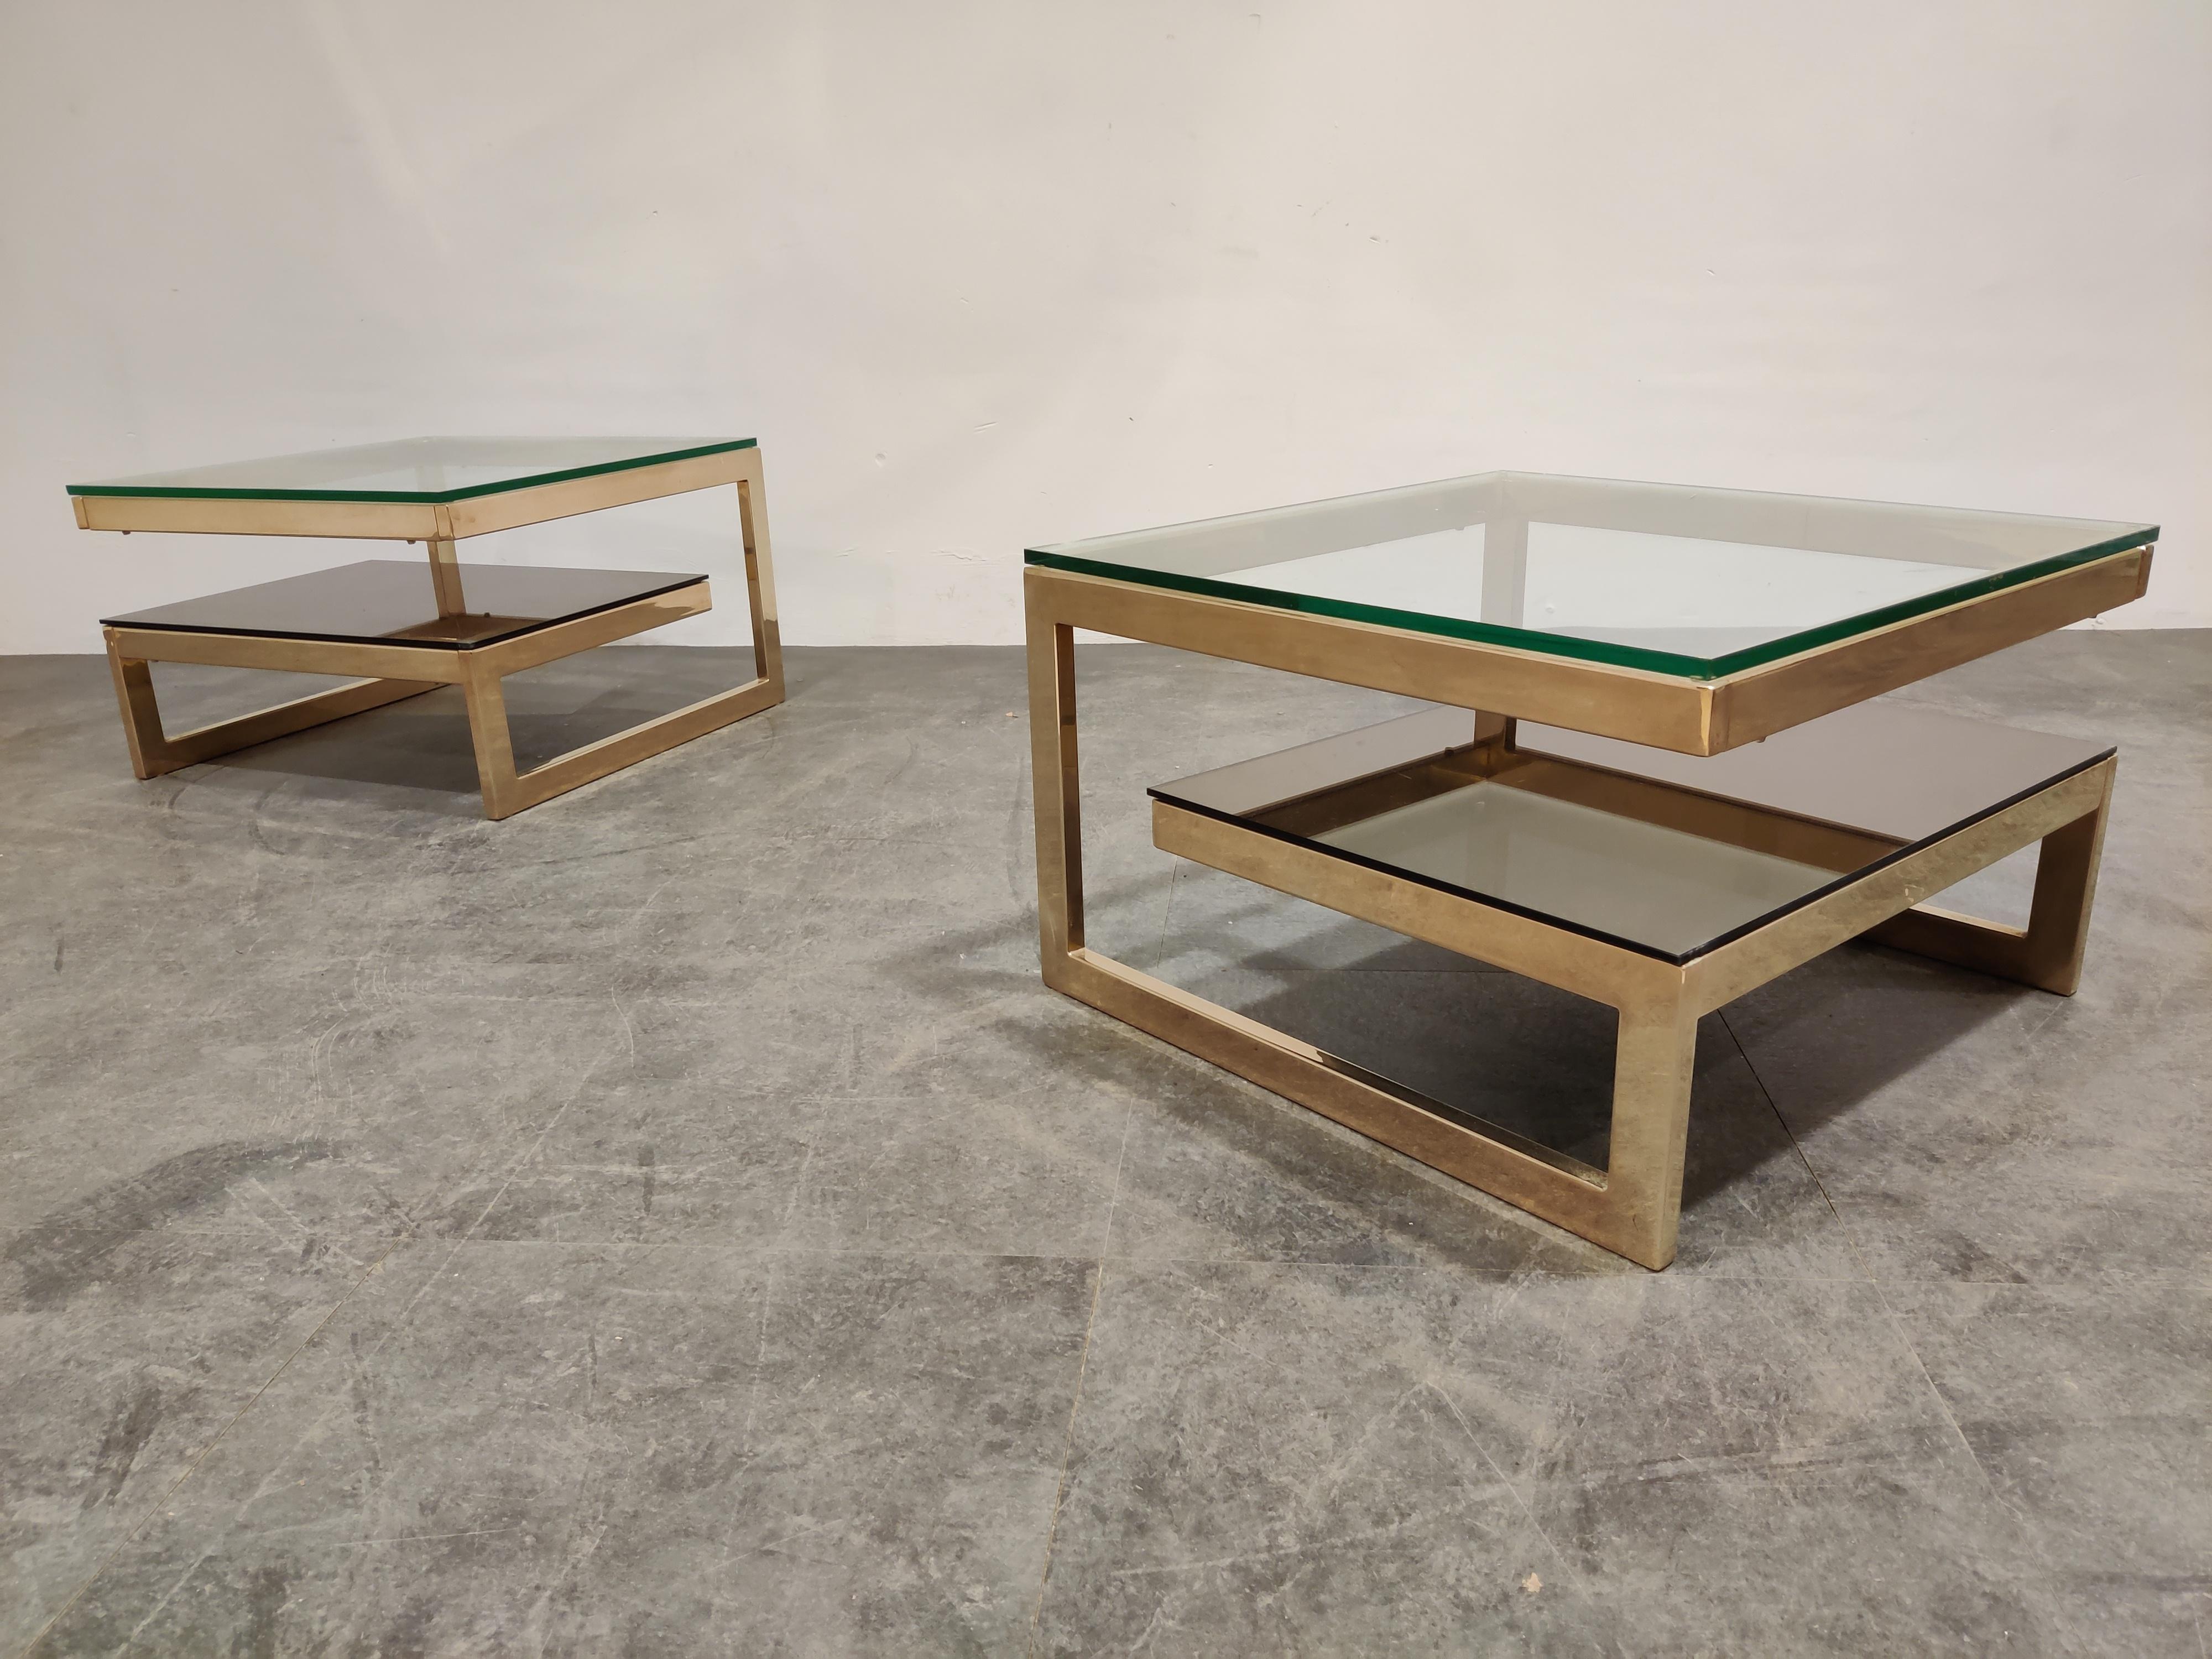 Pair of 23-karat gold layered 'G'-shaped side tables produced by Belgochrom.

The tables have clear and mirrored glass tops.

Good condition, original glass.

1970s - Belgium

Measures: Height 37cm/14.56